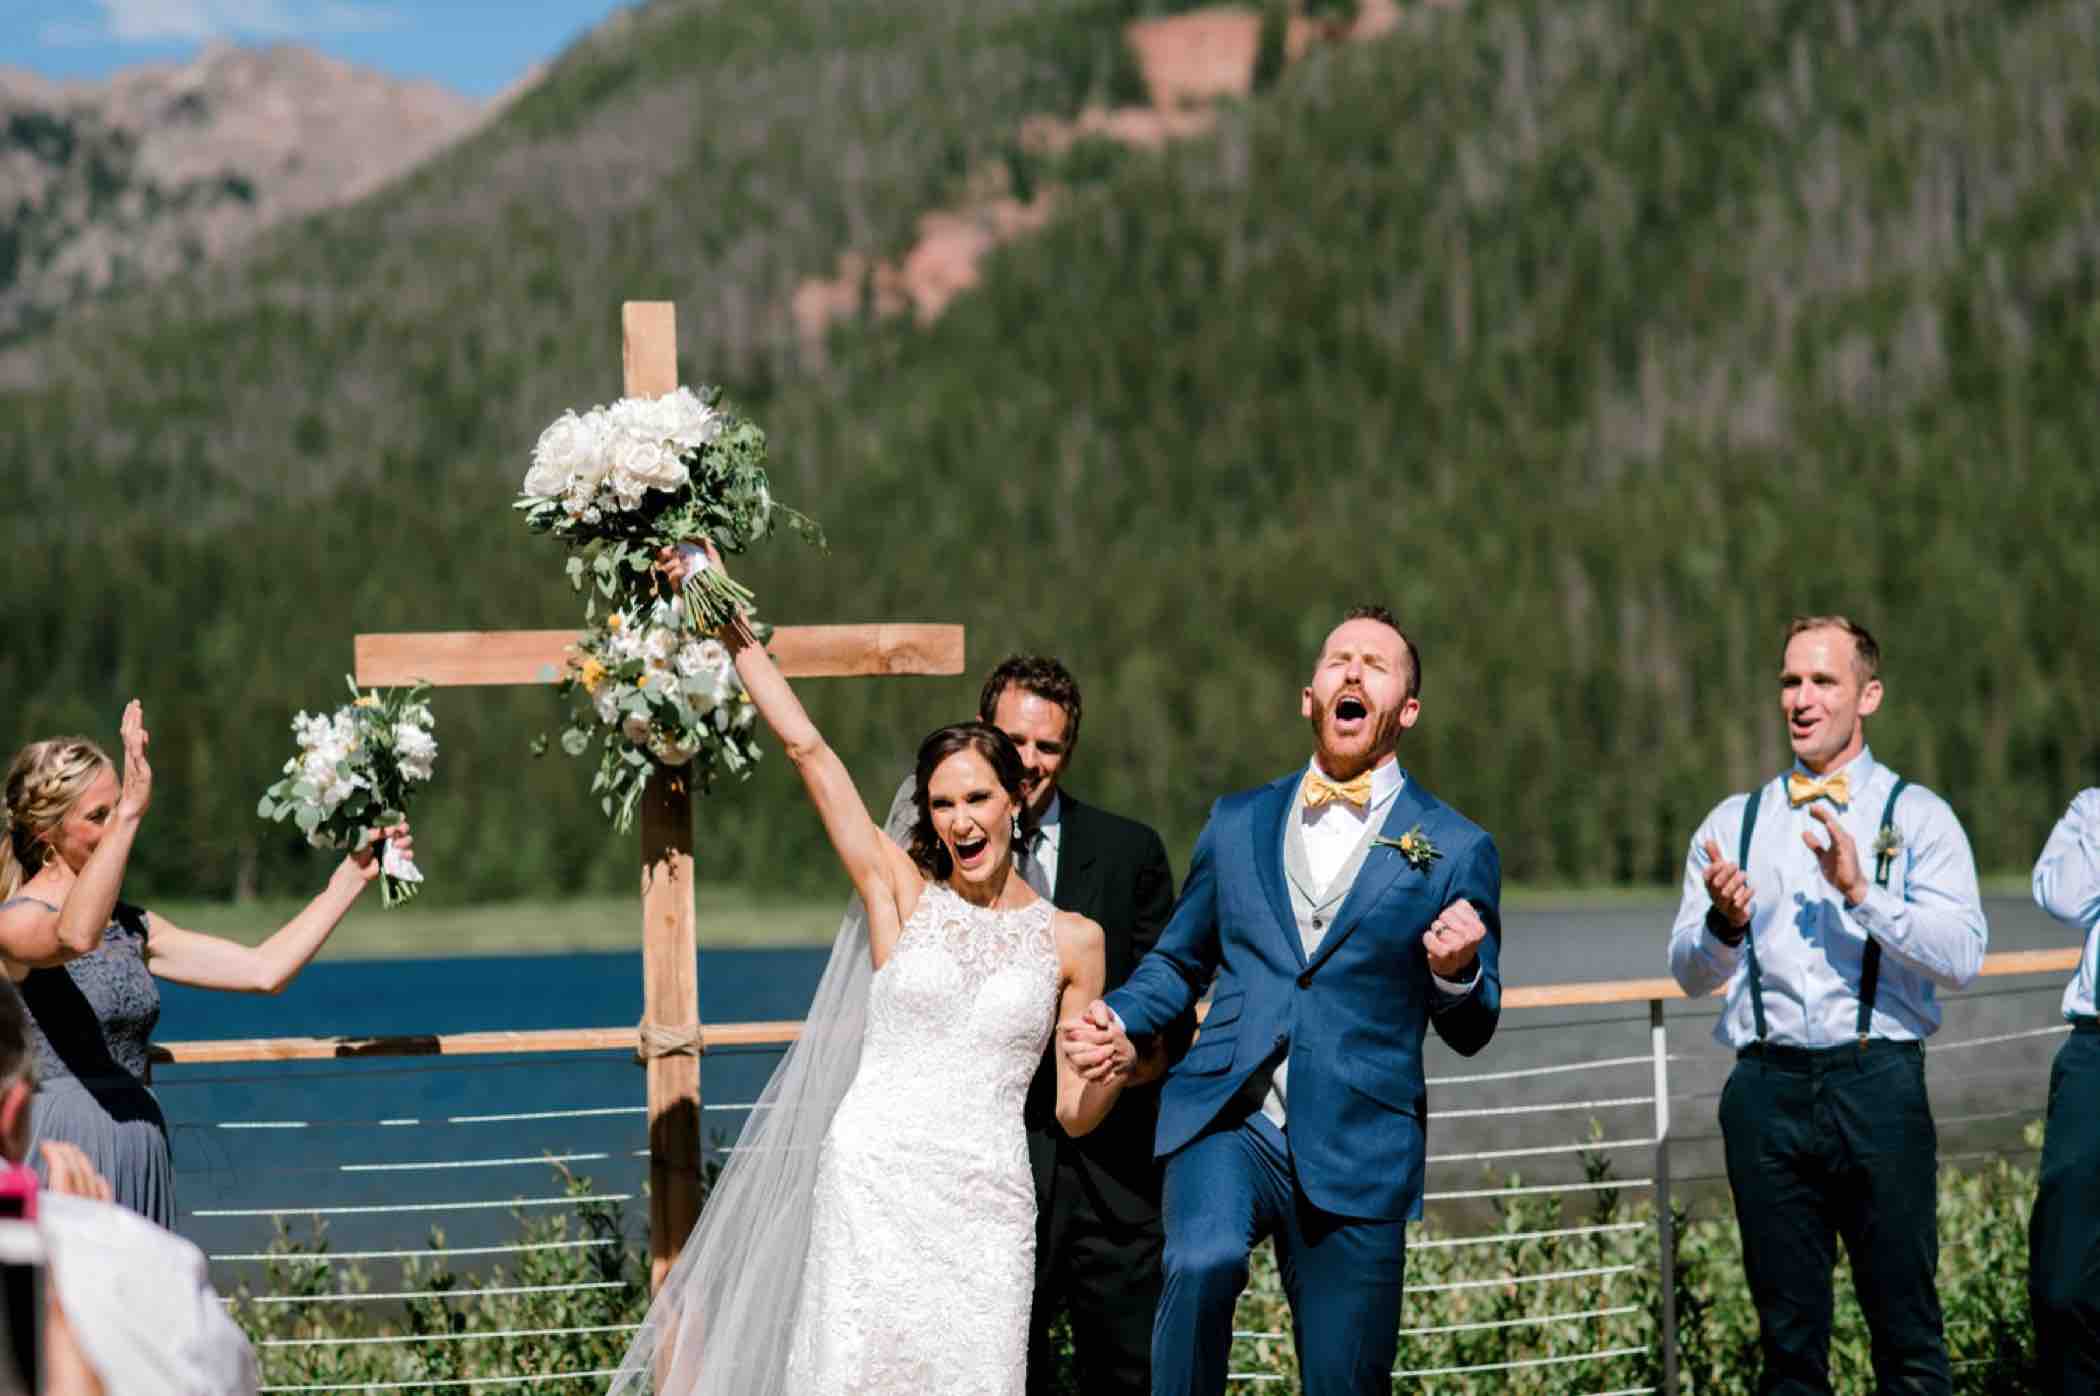 Kris and Sallie, bride and groom, celebrate their wedding ceremony at Piney River Ranch in Vail, Colorado.